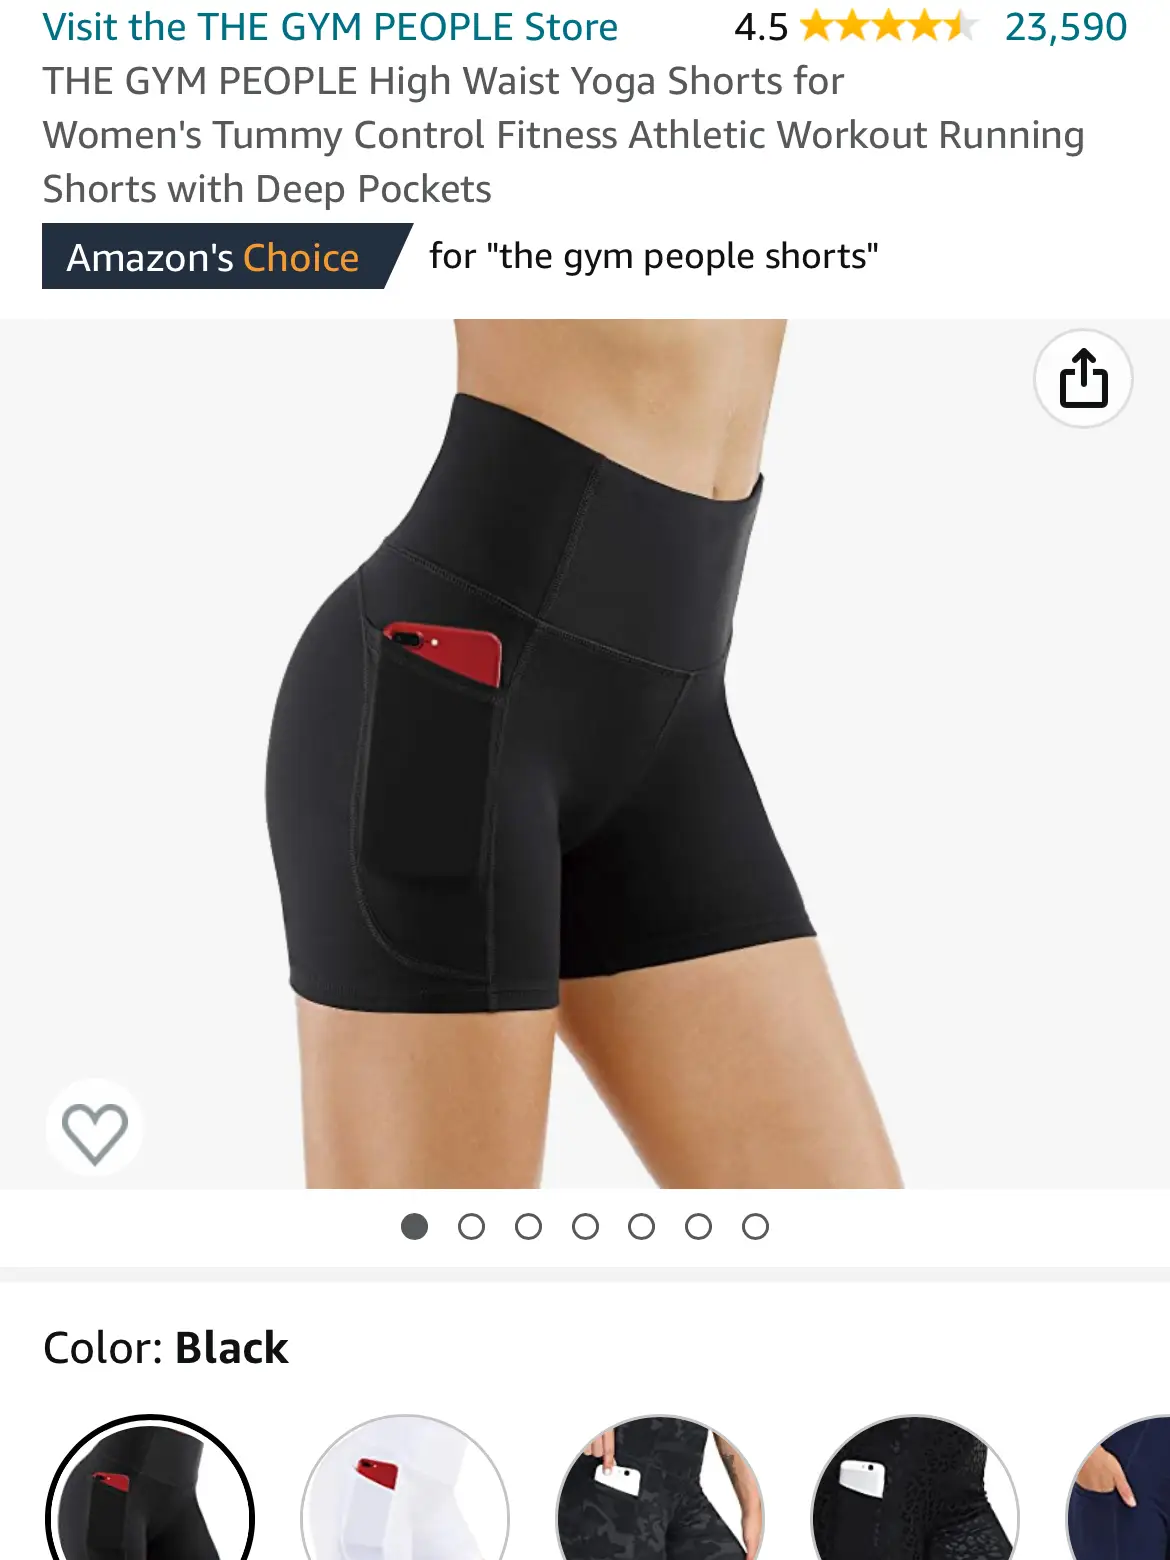 Buy THE GYM PEOPLE High Waist Yoga Shorts for Women Tummy Control